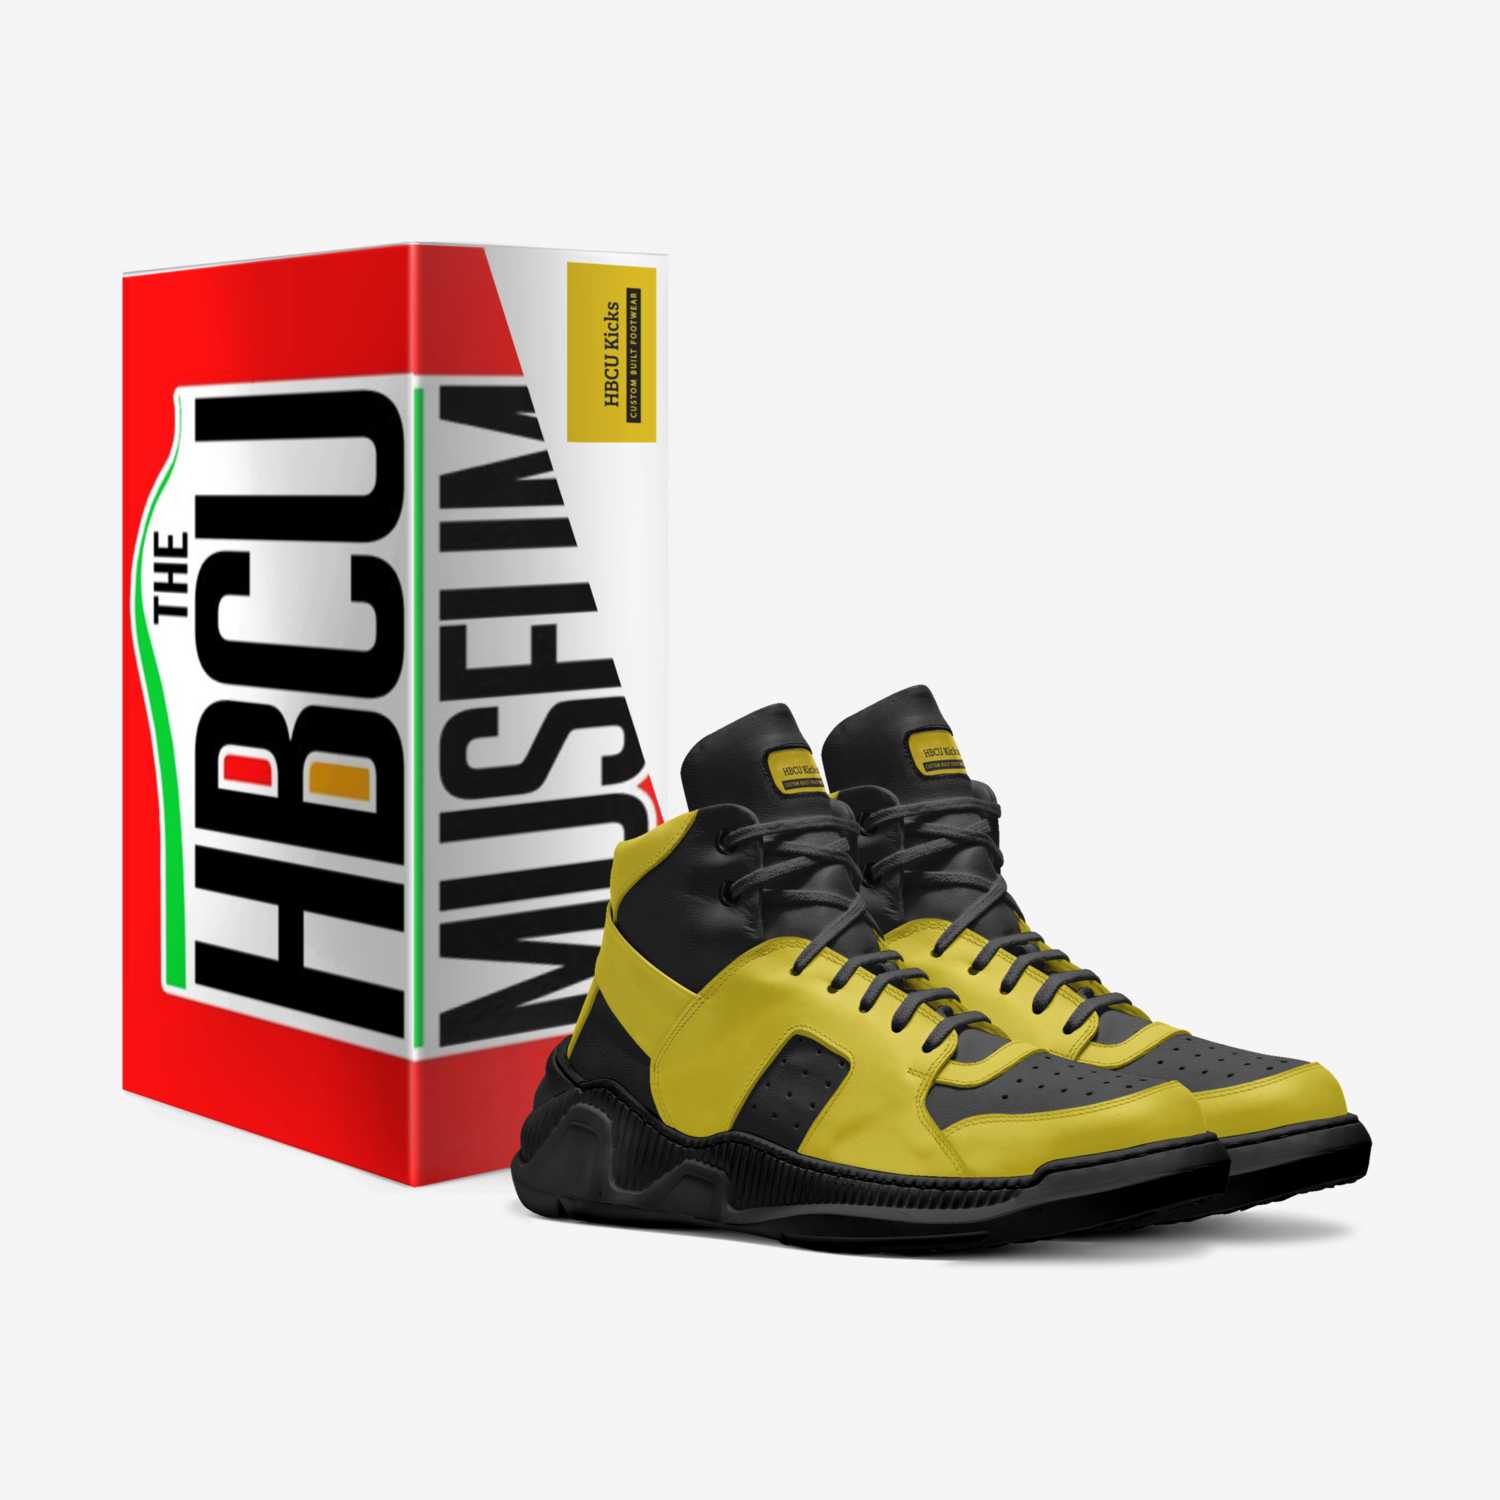 HBCU Kicks custom made in Italy shoes by Day1 J | Box view